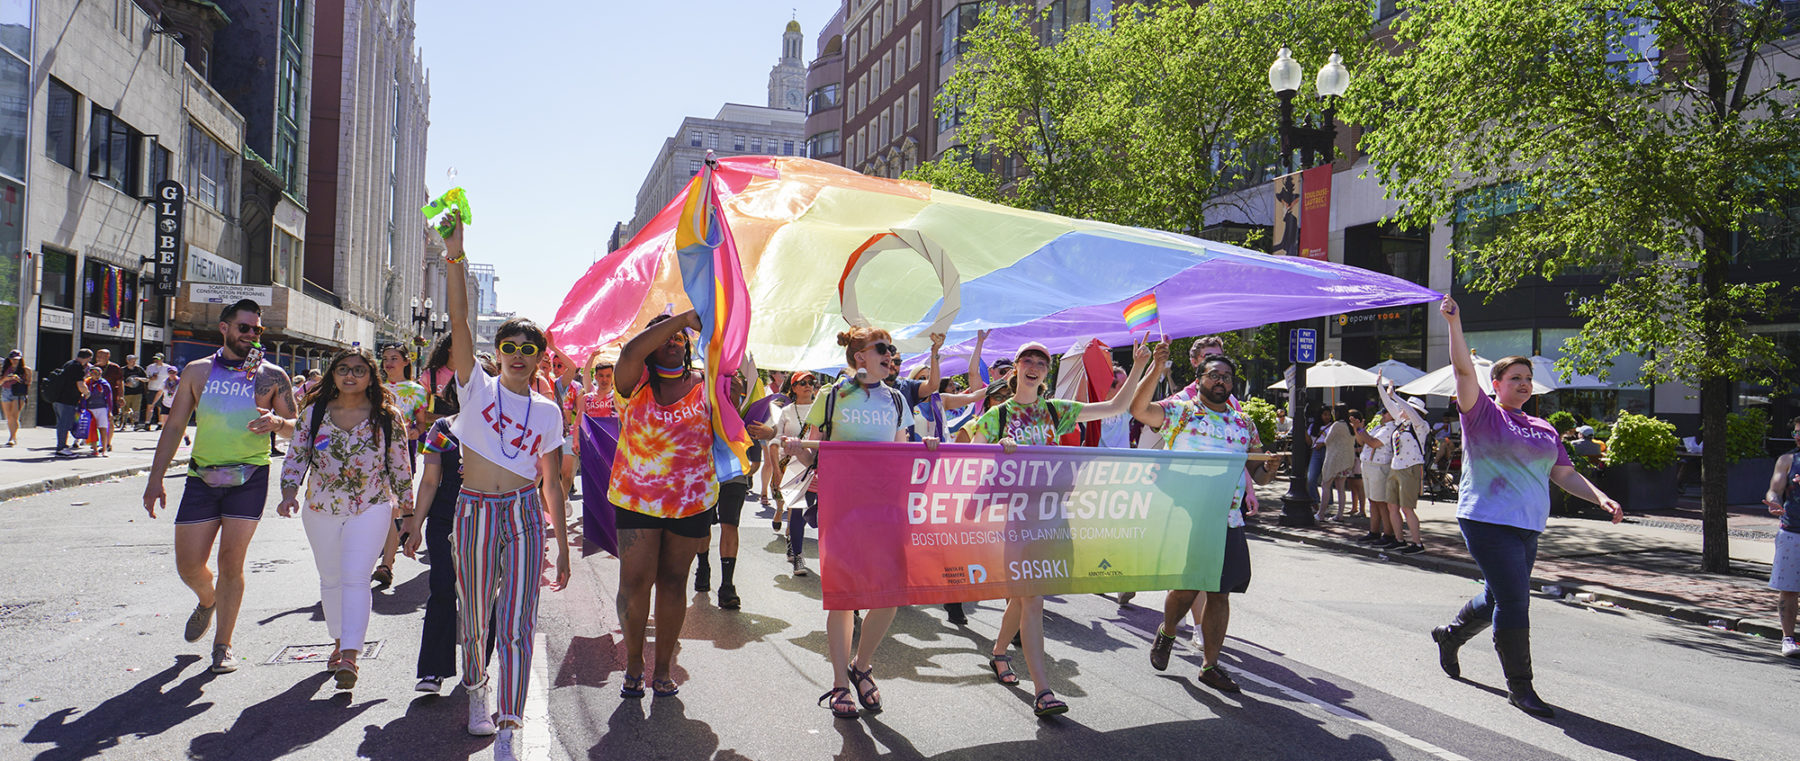 Group marching in Pride parade with banner and flag waving overhead